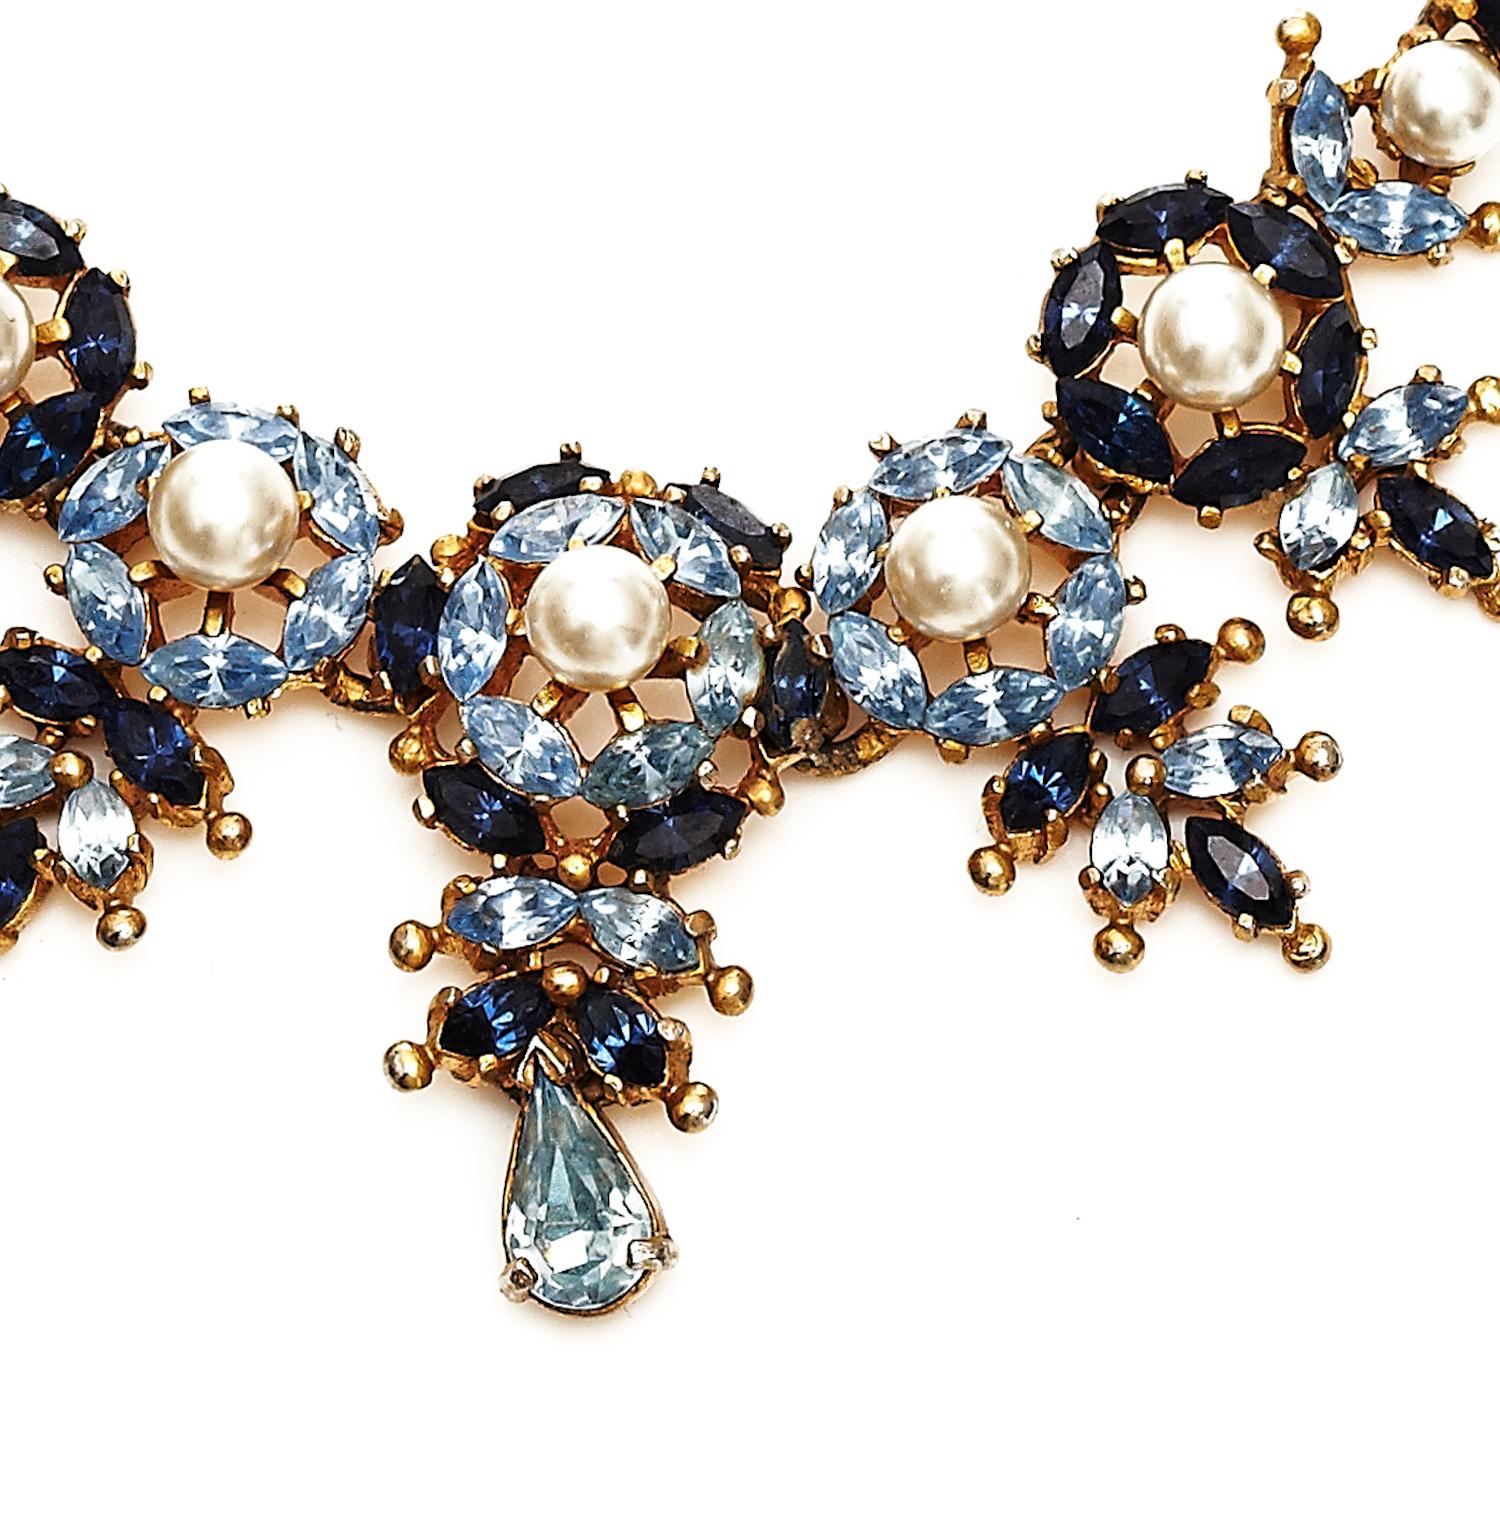 A classic 1950’s necklace by Mitchel Maer for Christian Dior. The pearls, faux sapphire and turquoise stones combination is a style that's quintessentially 1950’s and resembles fine jewellery. It's signed in the usual place for Maer pieces on an